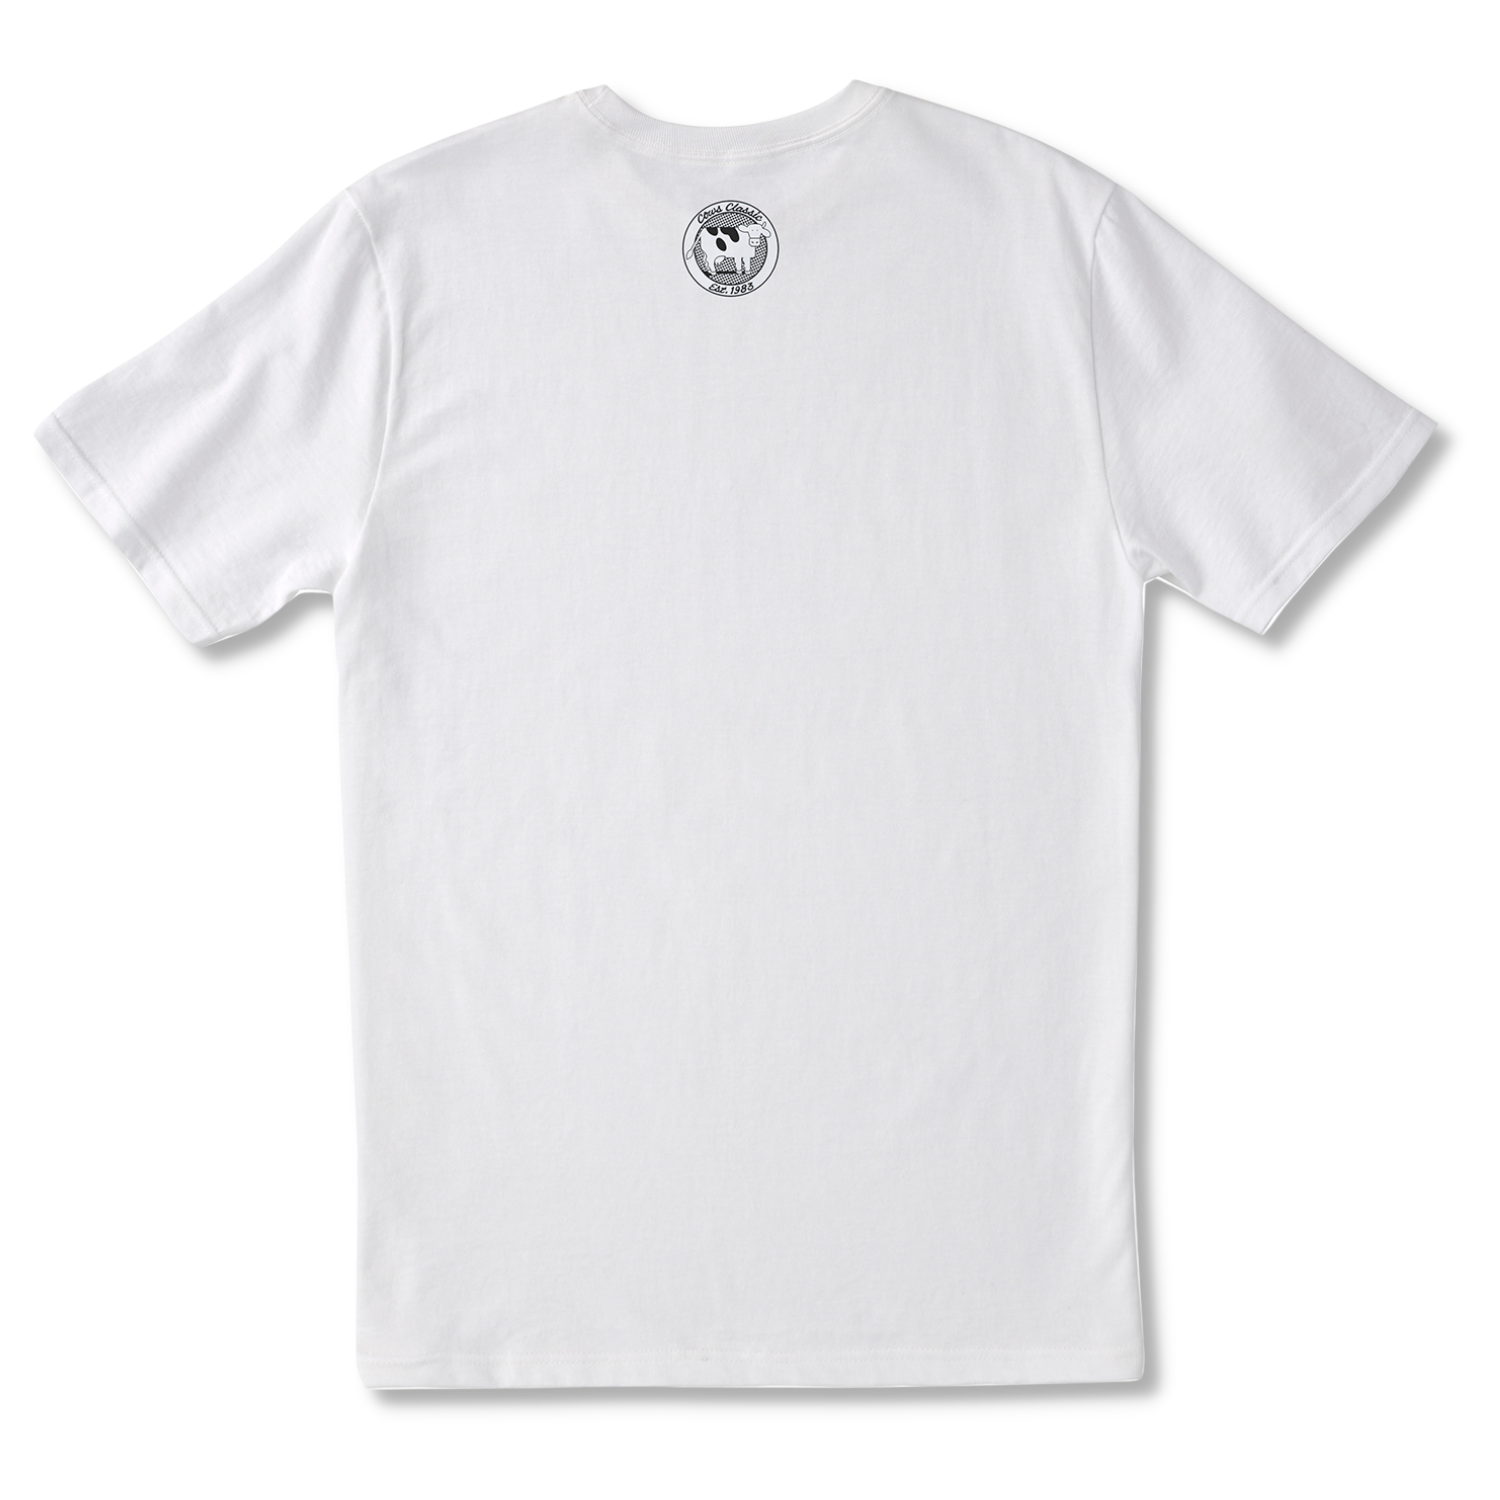 Peace COWS Classic T